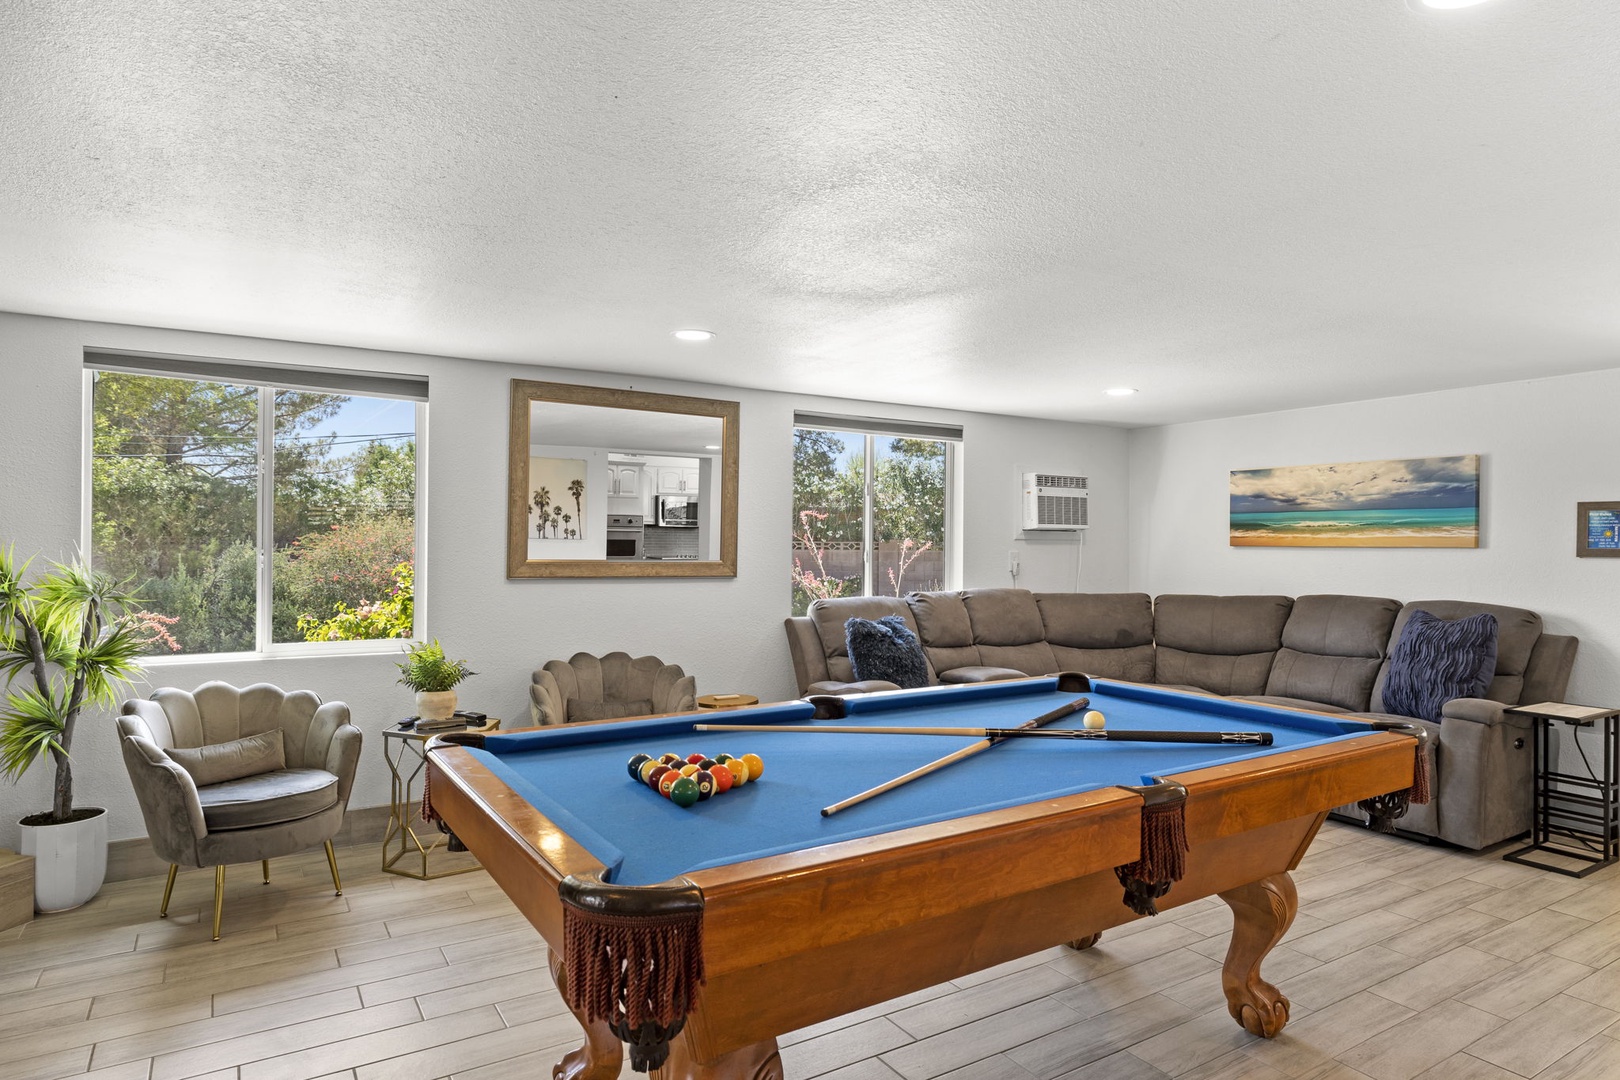 Game room with pool table and additional living area.